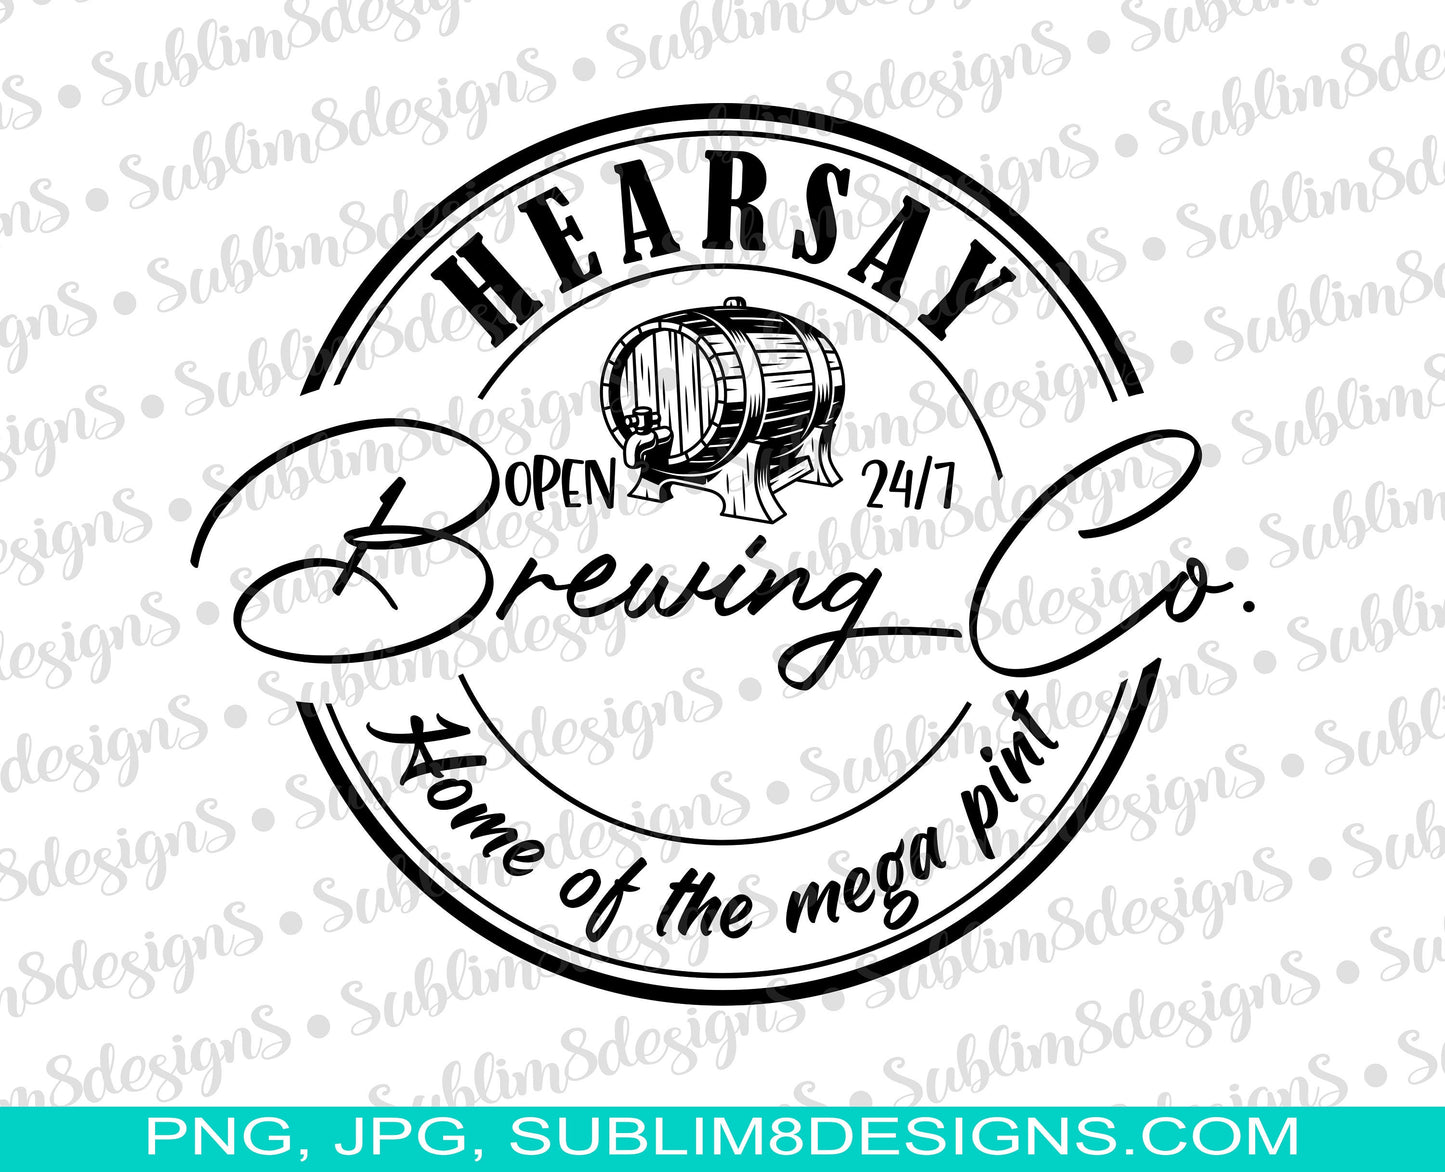 Hearsay Brewing Co SVG, PNG and JPG